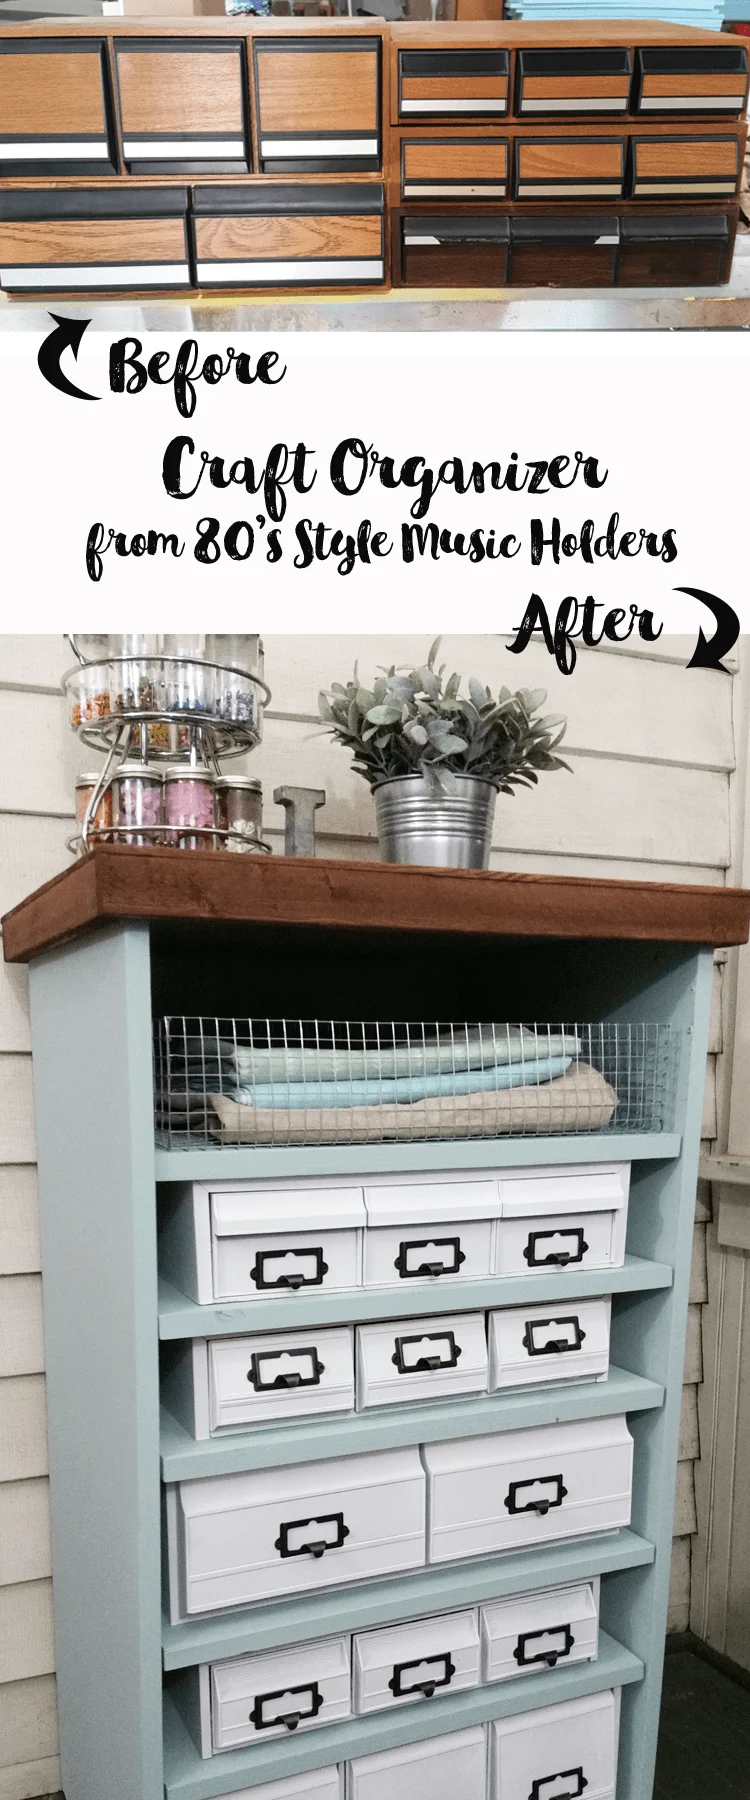  I found a bunch of the old 80's cassette, cd and vhs holders.  I gave them a cohesive look  with white paint and stacked them in an old stereo cabinet to create this awesome craft organizer!